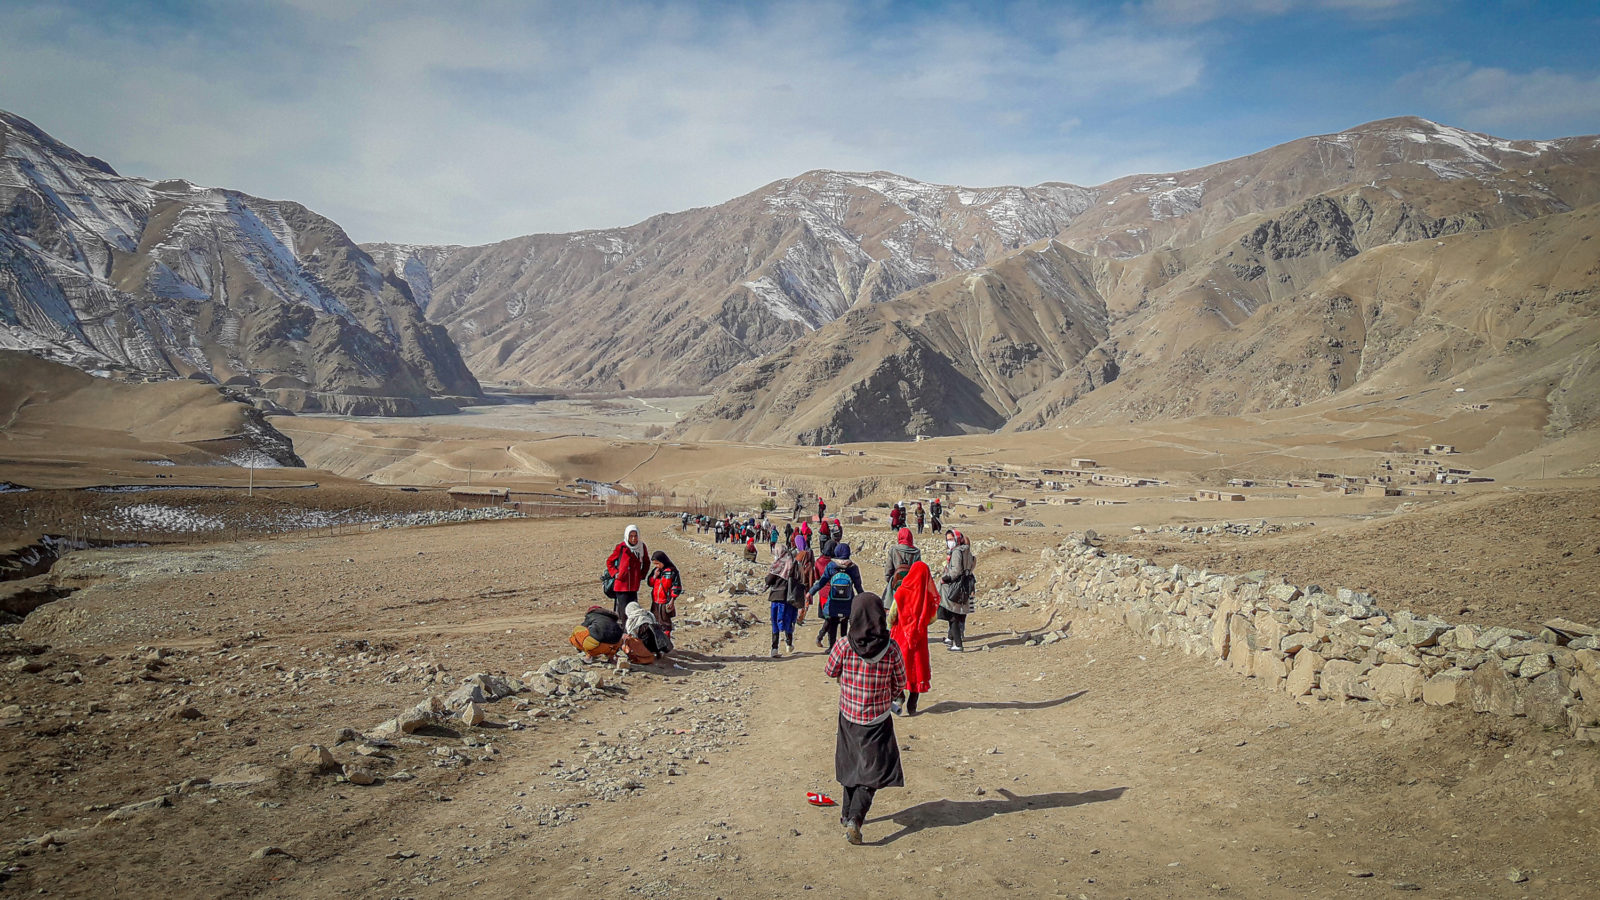 A photo of a group of girls walking along a dry dirt road with mountains in the backdrop